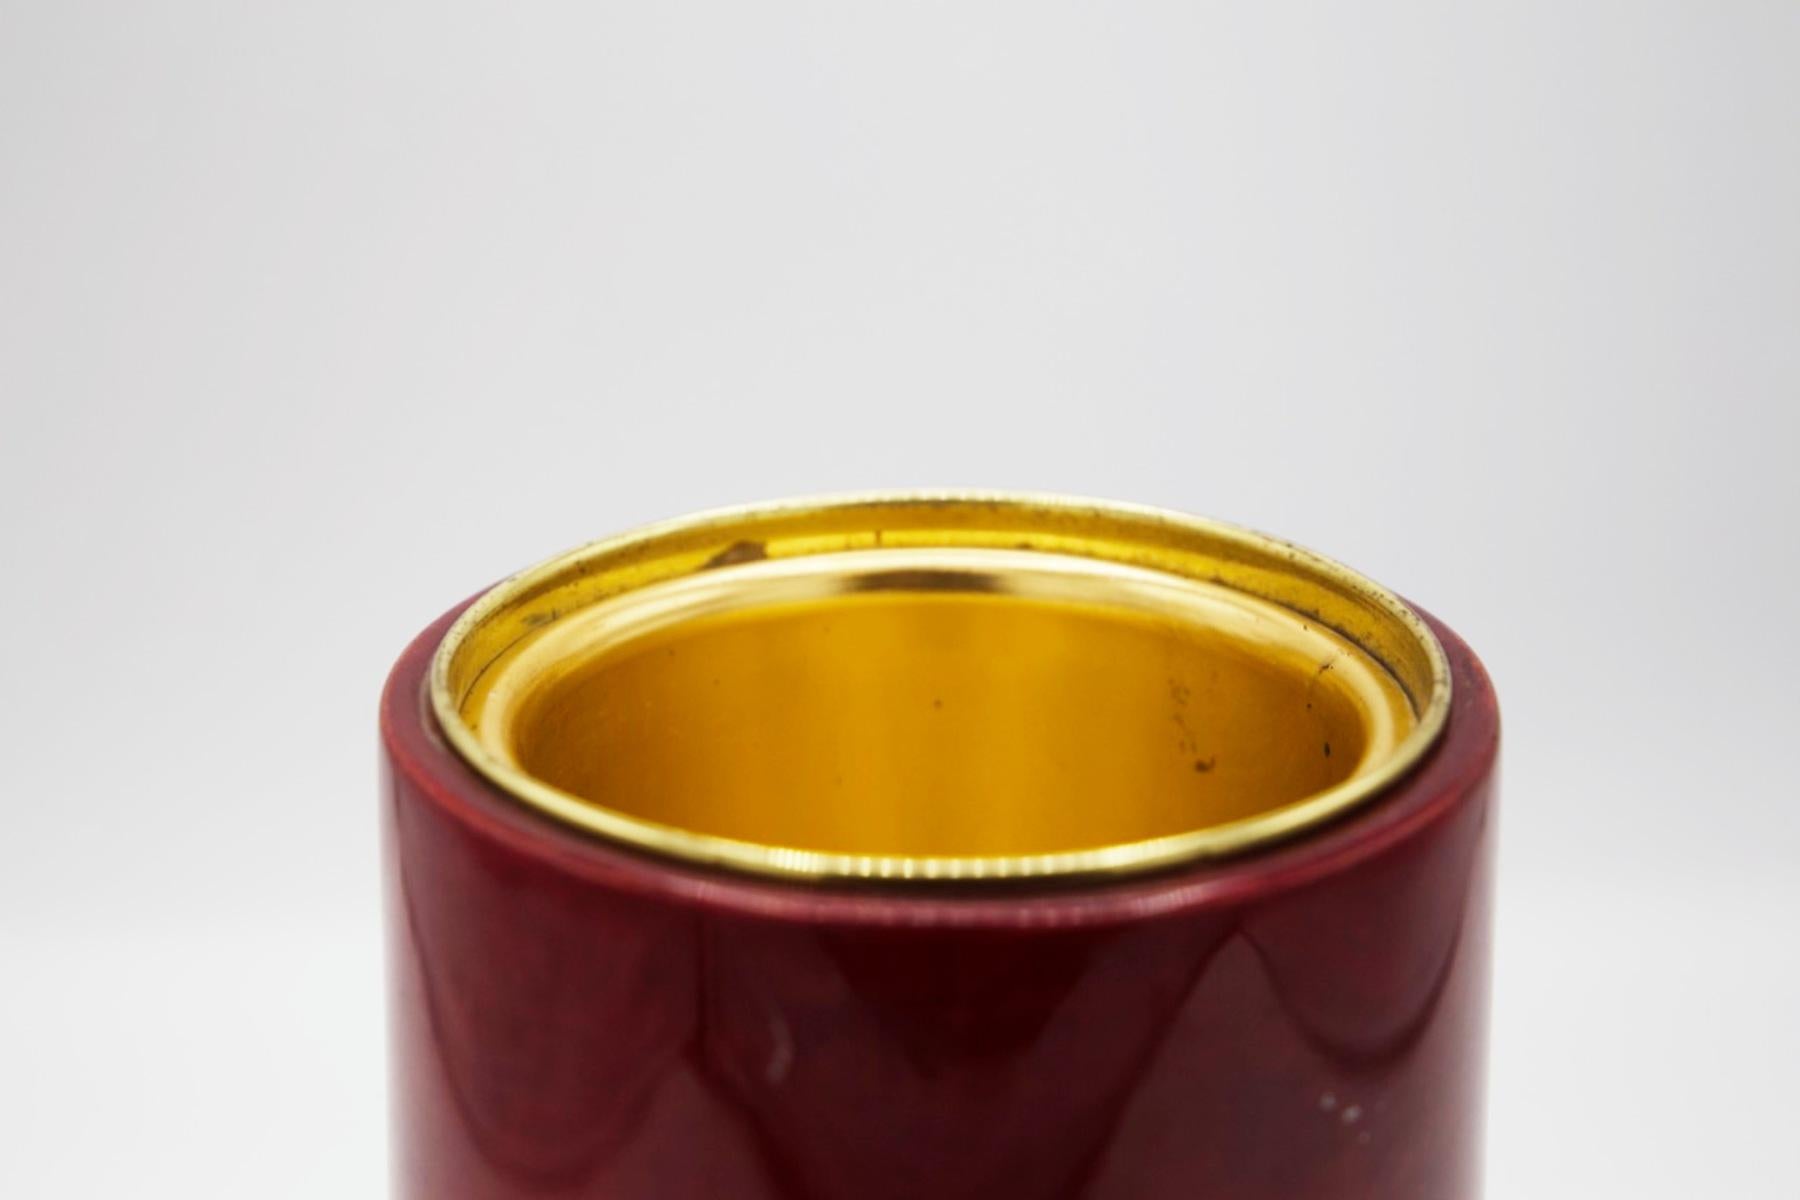 Beautiful beverage and ice holder made by Giorgio Tura in the 1950s.
Entirely made of red parchment on the outside, with a wider cylindrical base. The inside is gilded and can accommodate ice to allow drinks to be kept cold!